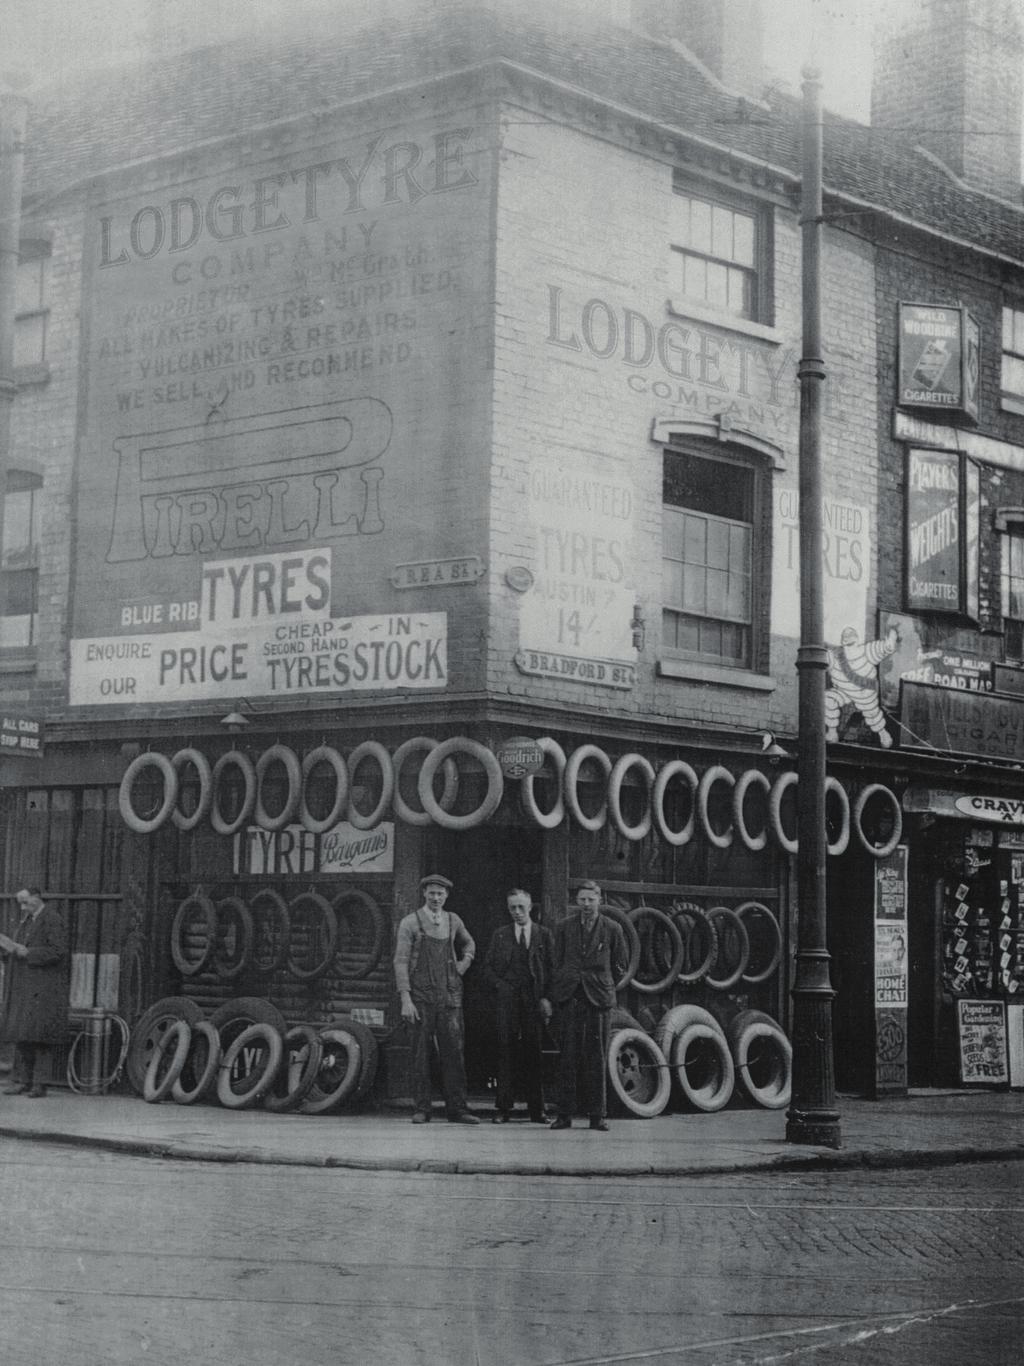 We ve come a long way together......thanks to all of our suppliers, customers and staff US www.lodgetyre.